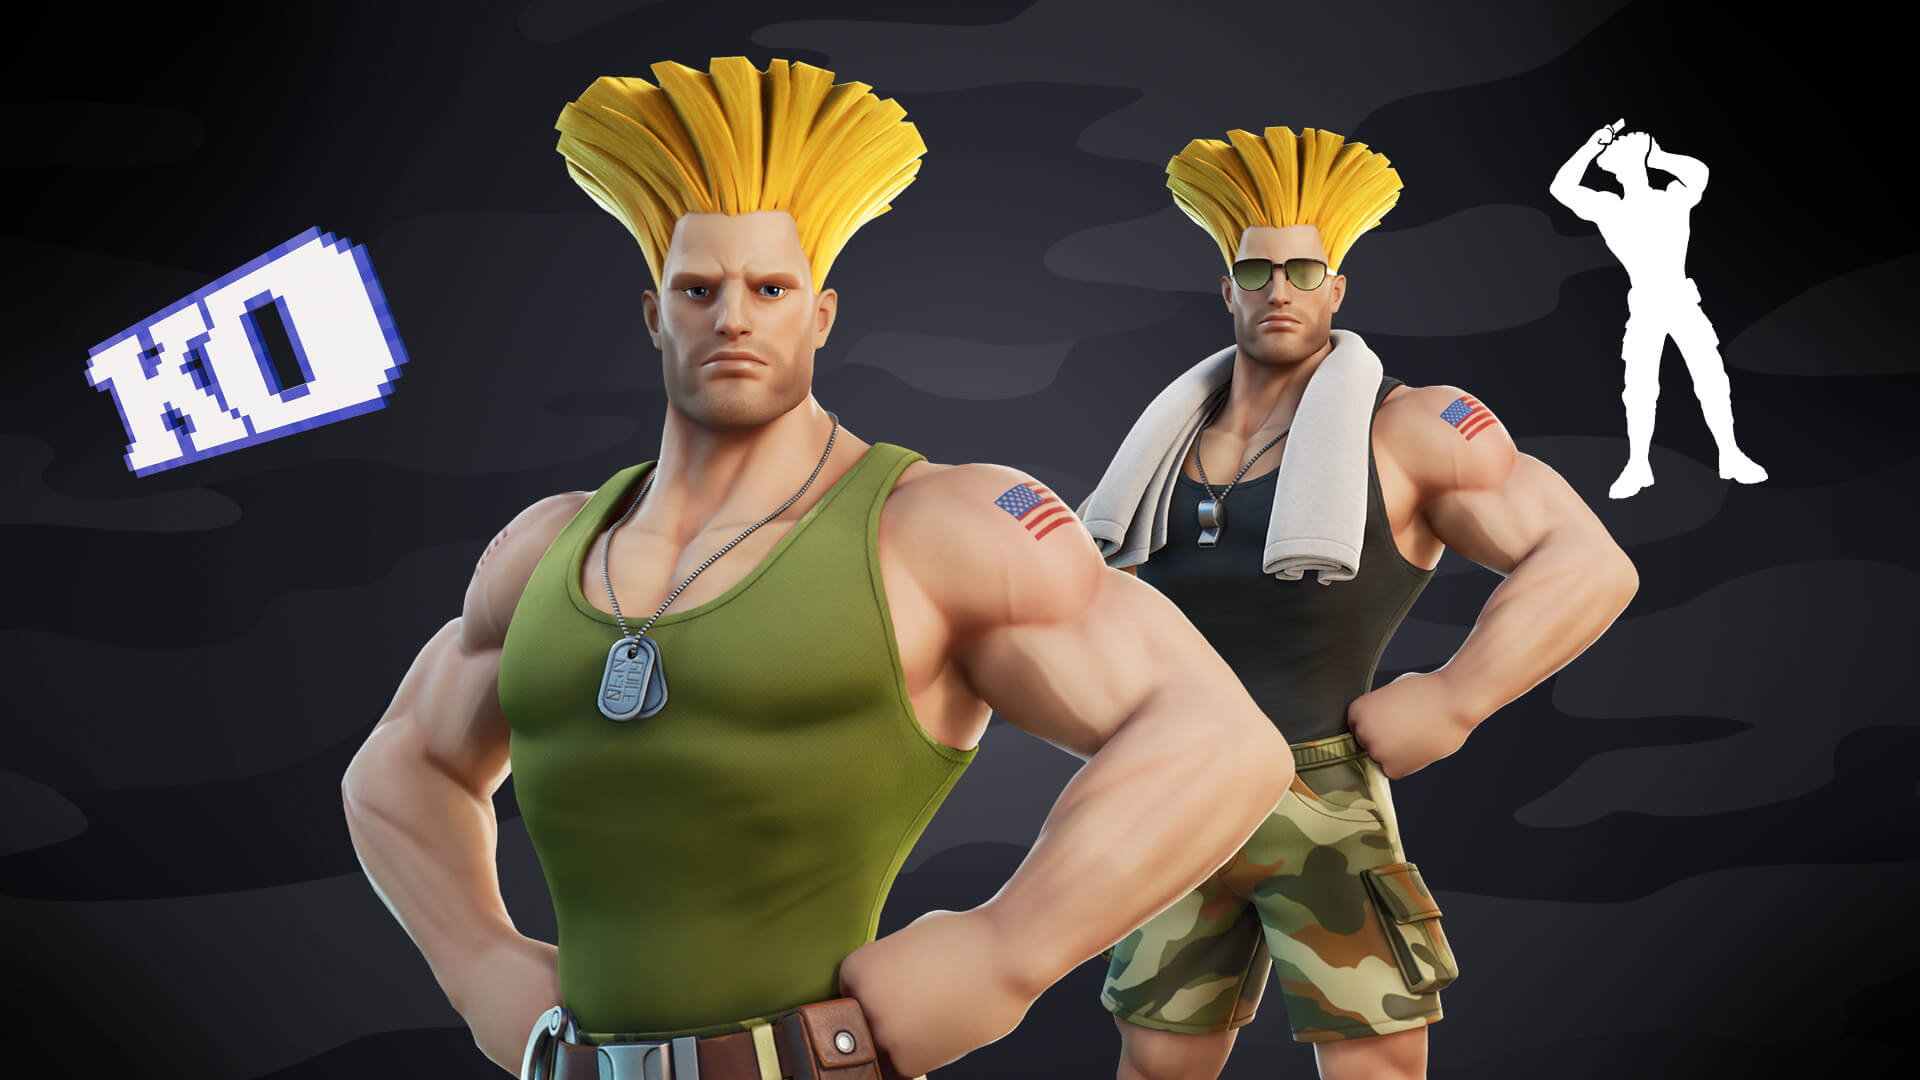 Cammy and Guile from Street Fighter are coming to Fortnite: outfits and tournament 